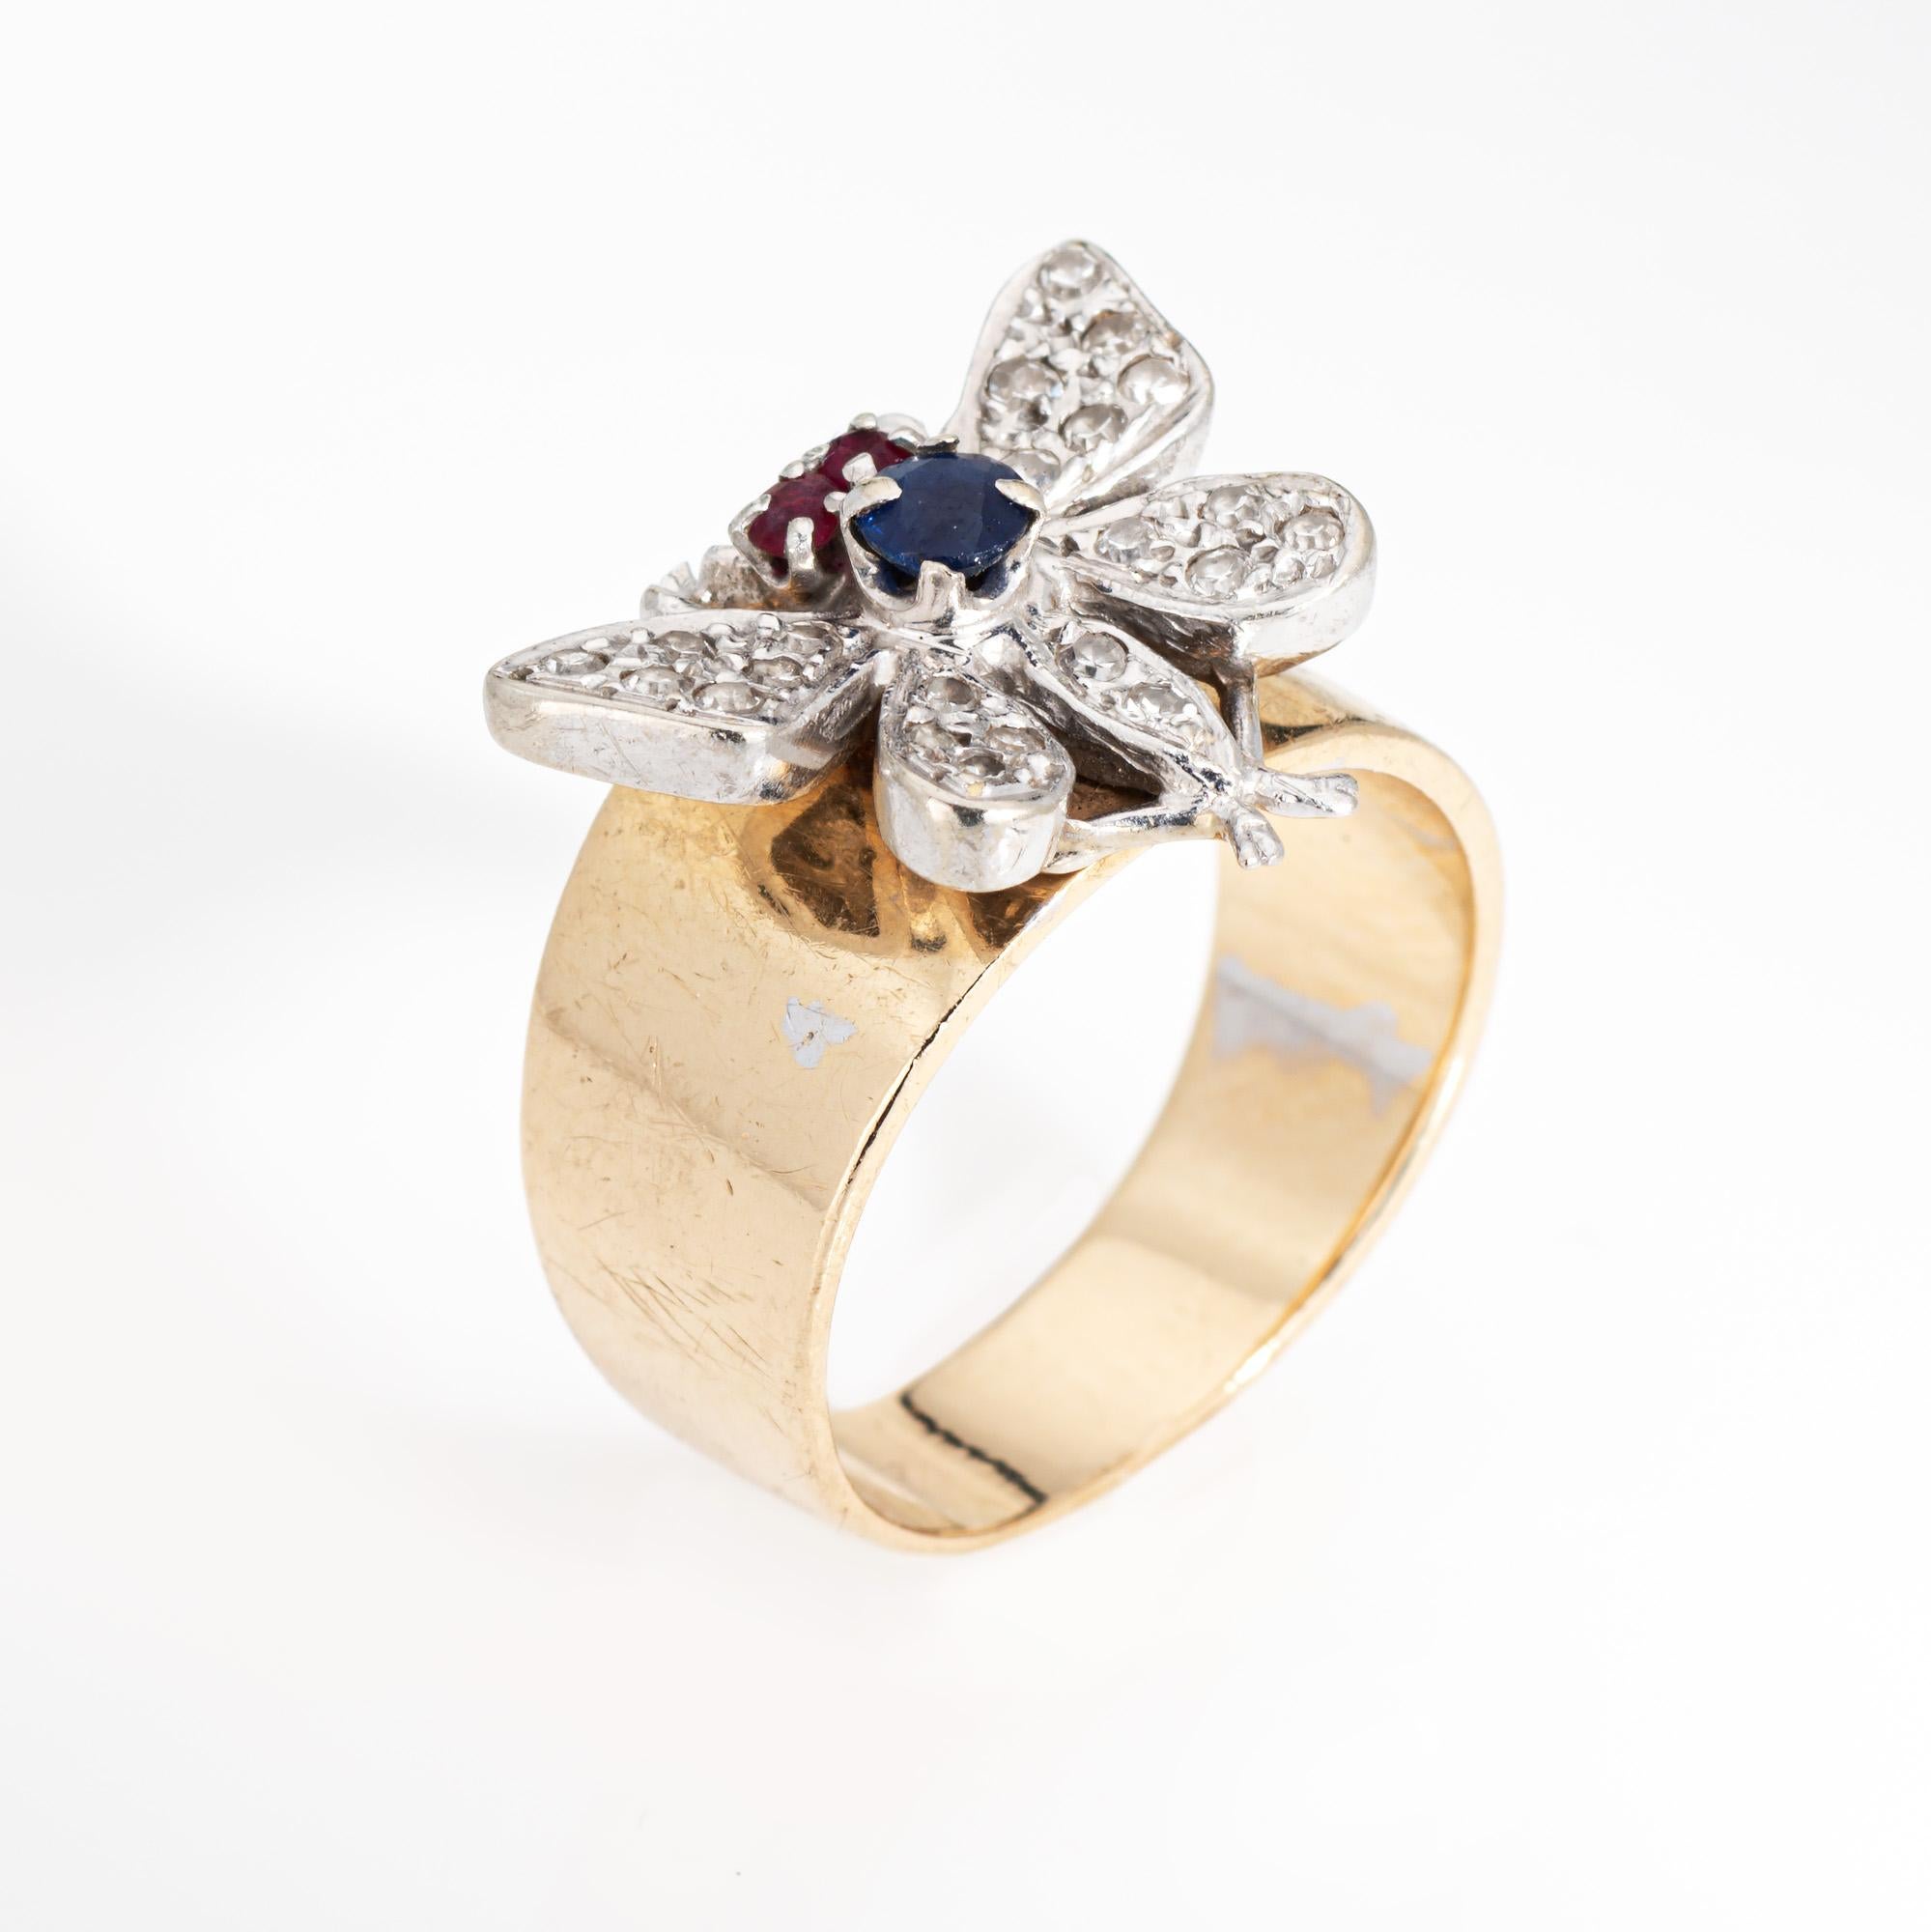 Stylish vintage butterfly ring (circa 1960s to 1970s) crafted in 14 karat yellow & white gold. 

Two approx. 1.5mm rubies and one approx. 3.5mm sapphire are set into the mount. 22 single cut diamonds total an estimated 0.10 carat (estimated at I-J